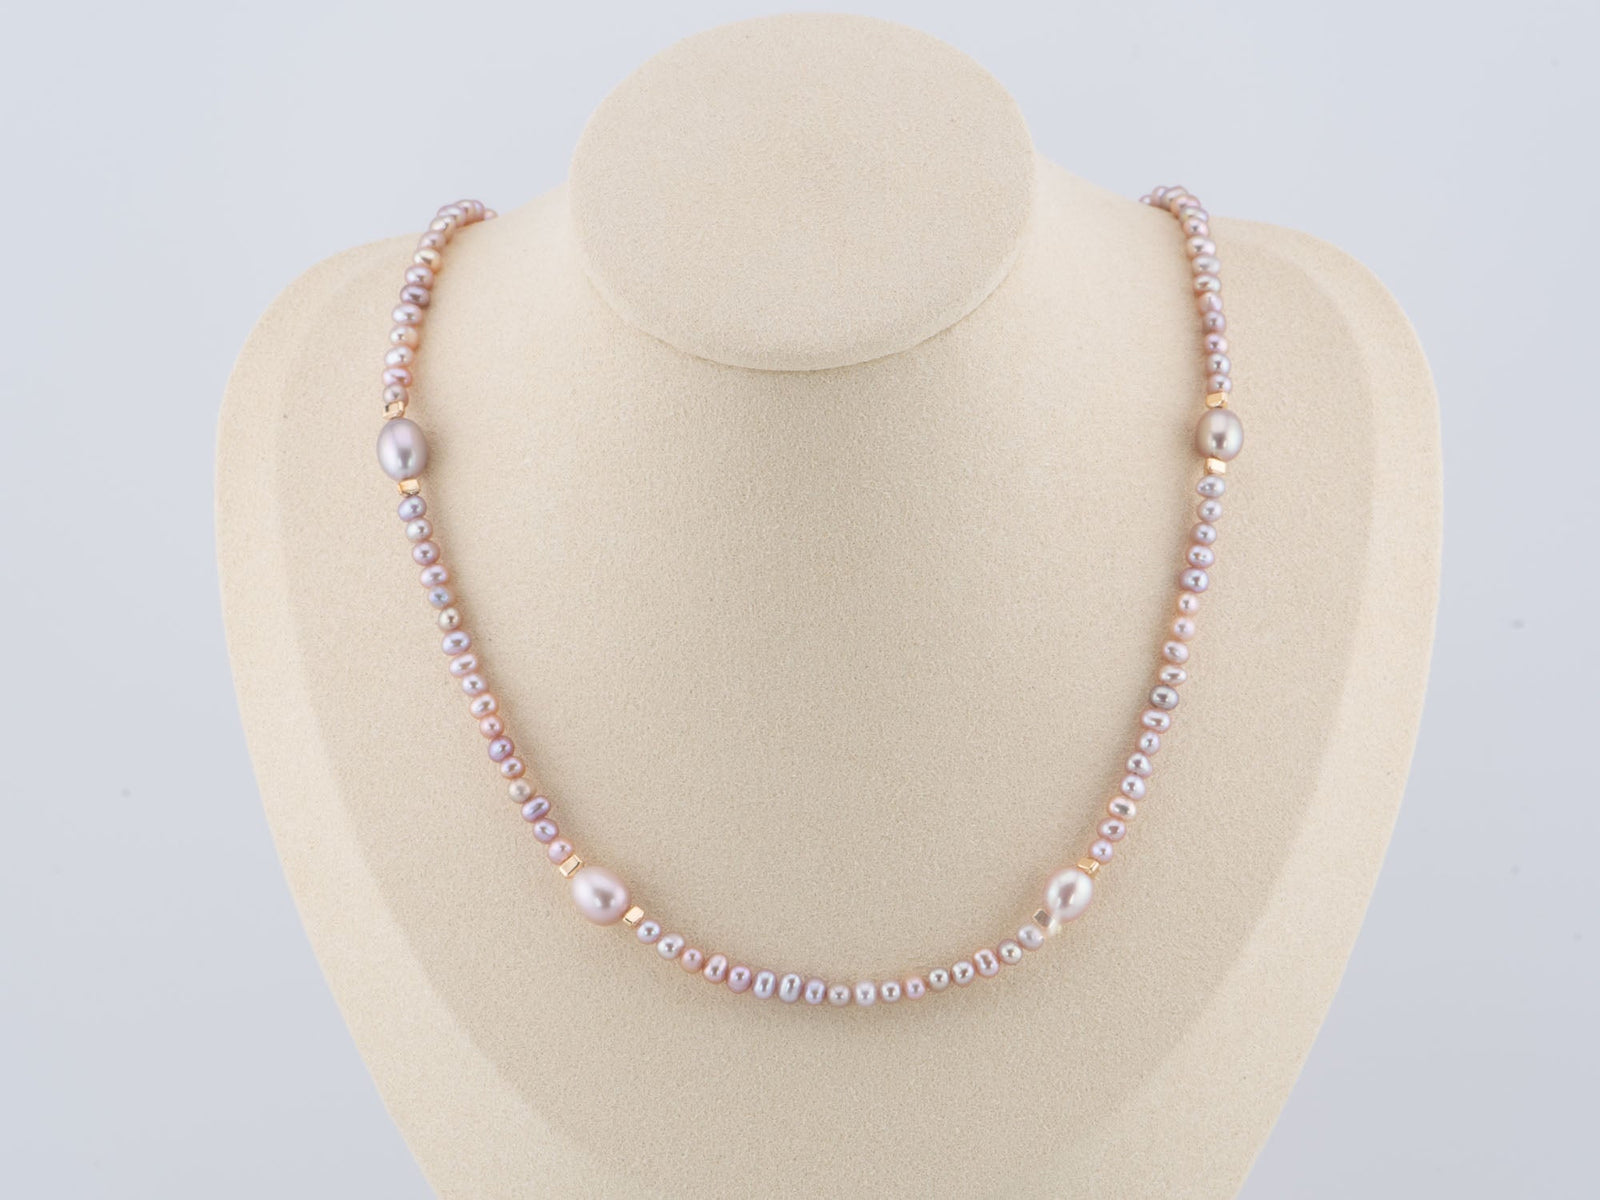 LOVELY Glass and Pearl Vintage Necklace,Pale Lavender Glass and Pearls -  Ruby Lane